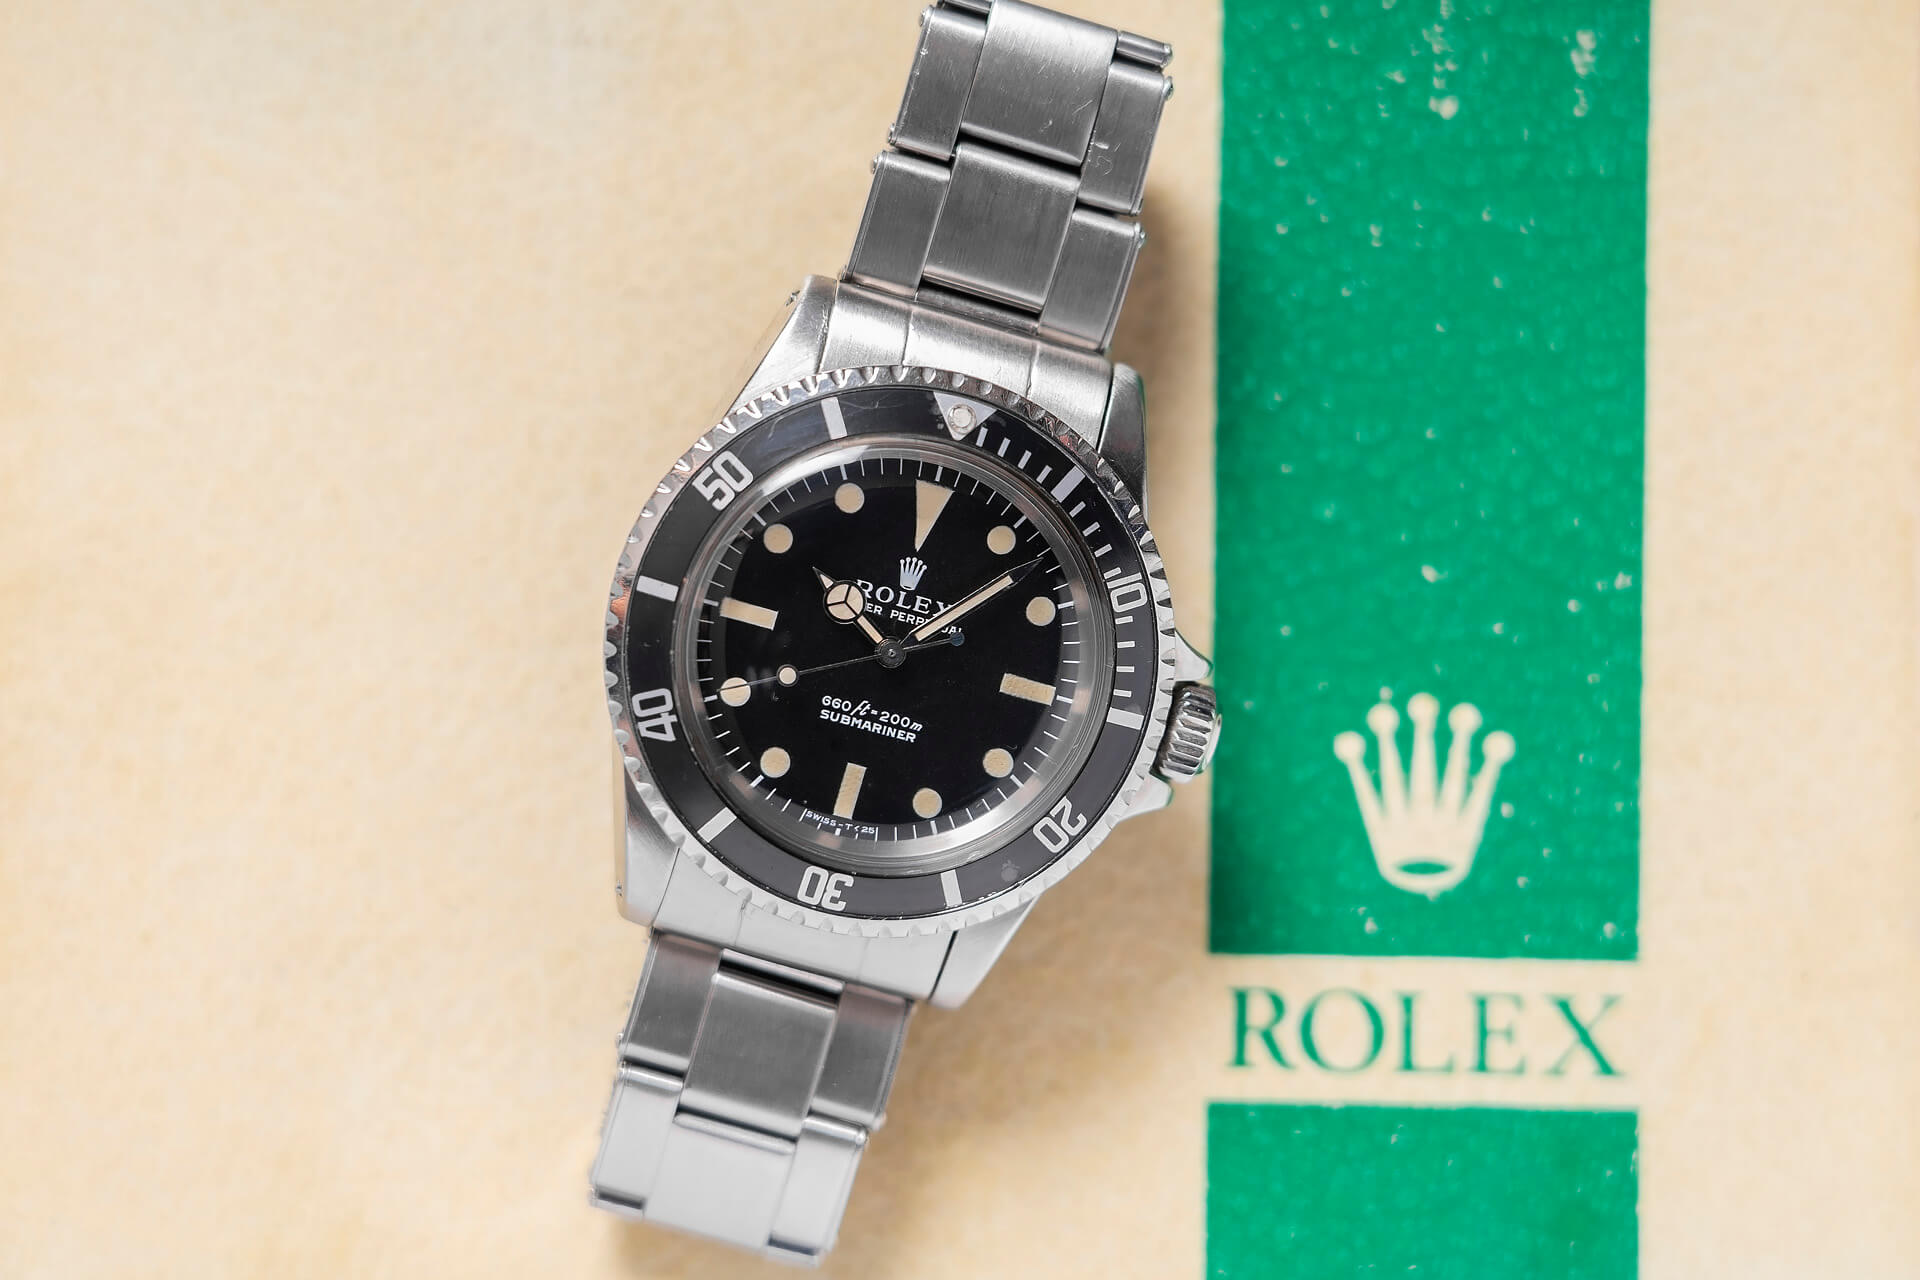 Diving Into The Rolex Submariner 5513